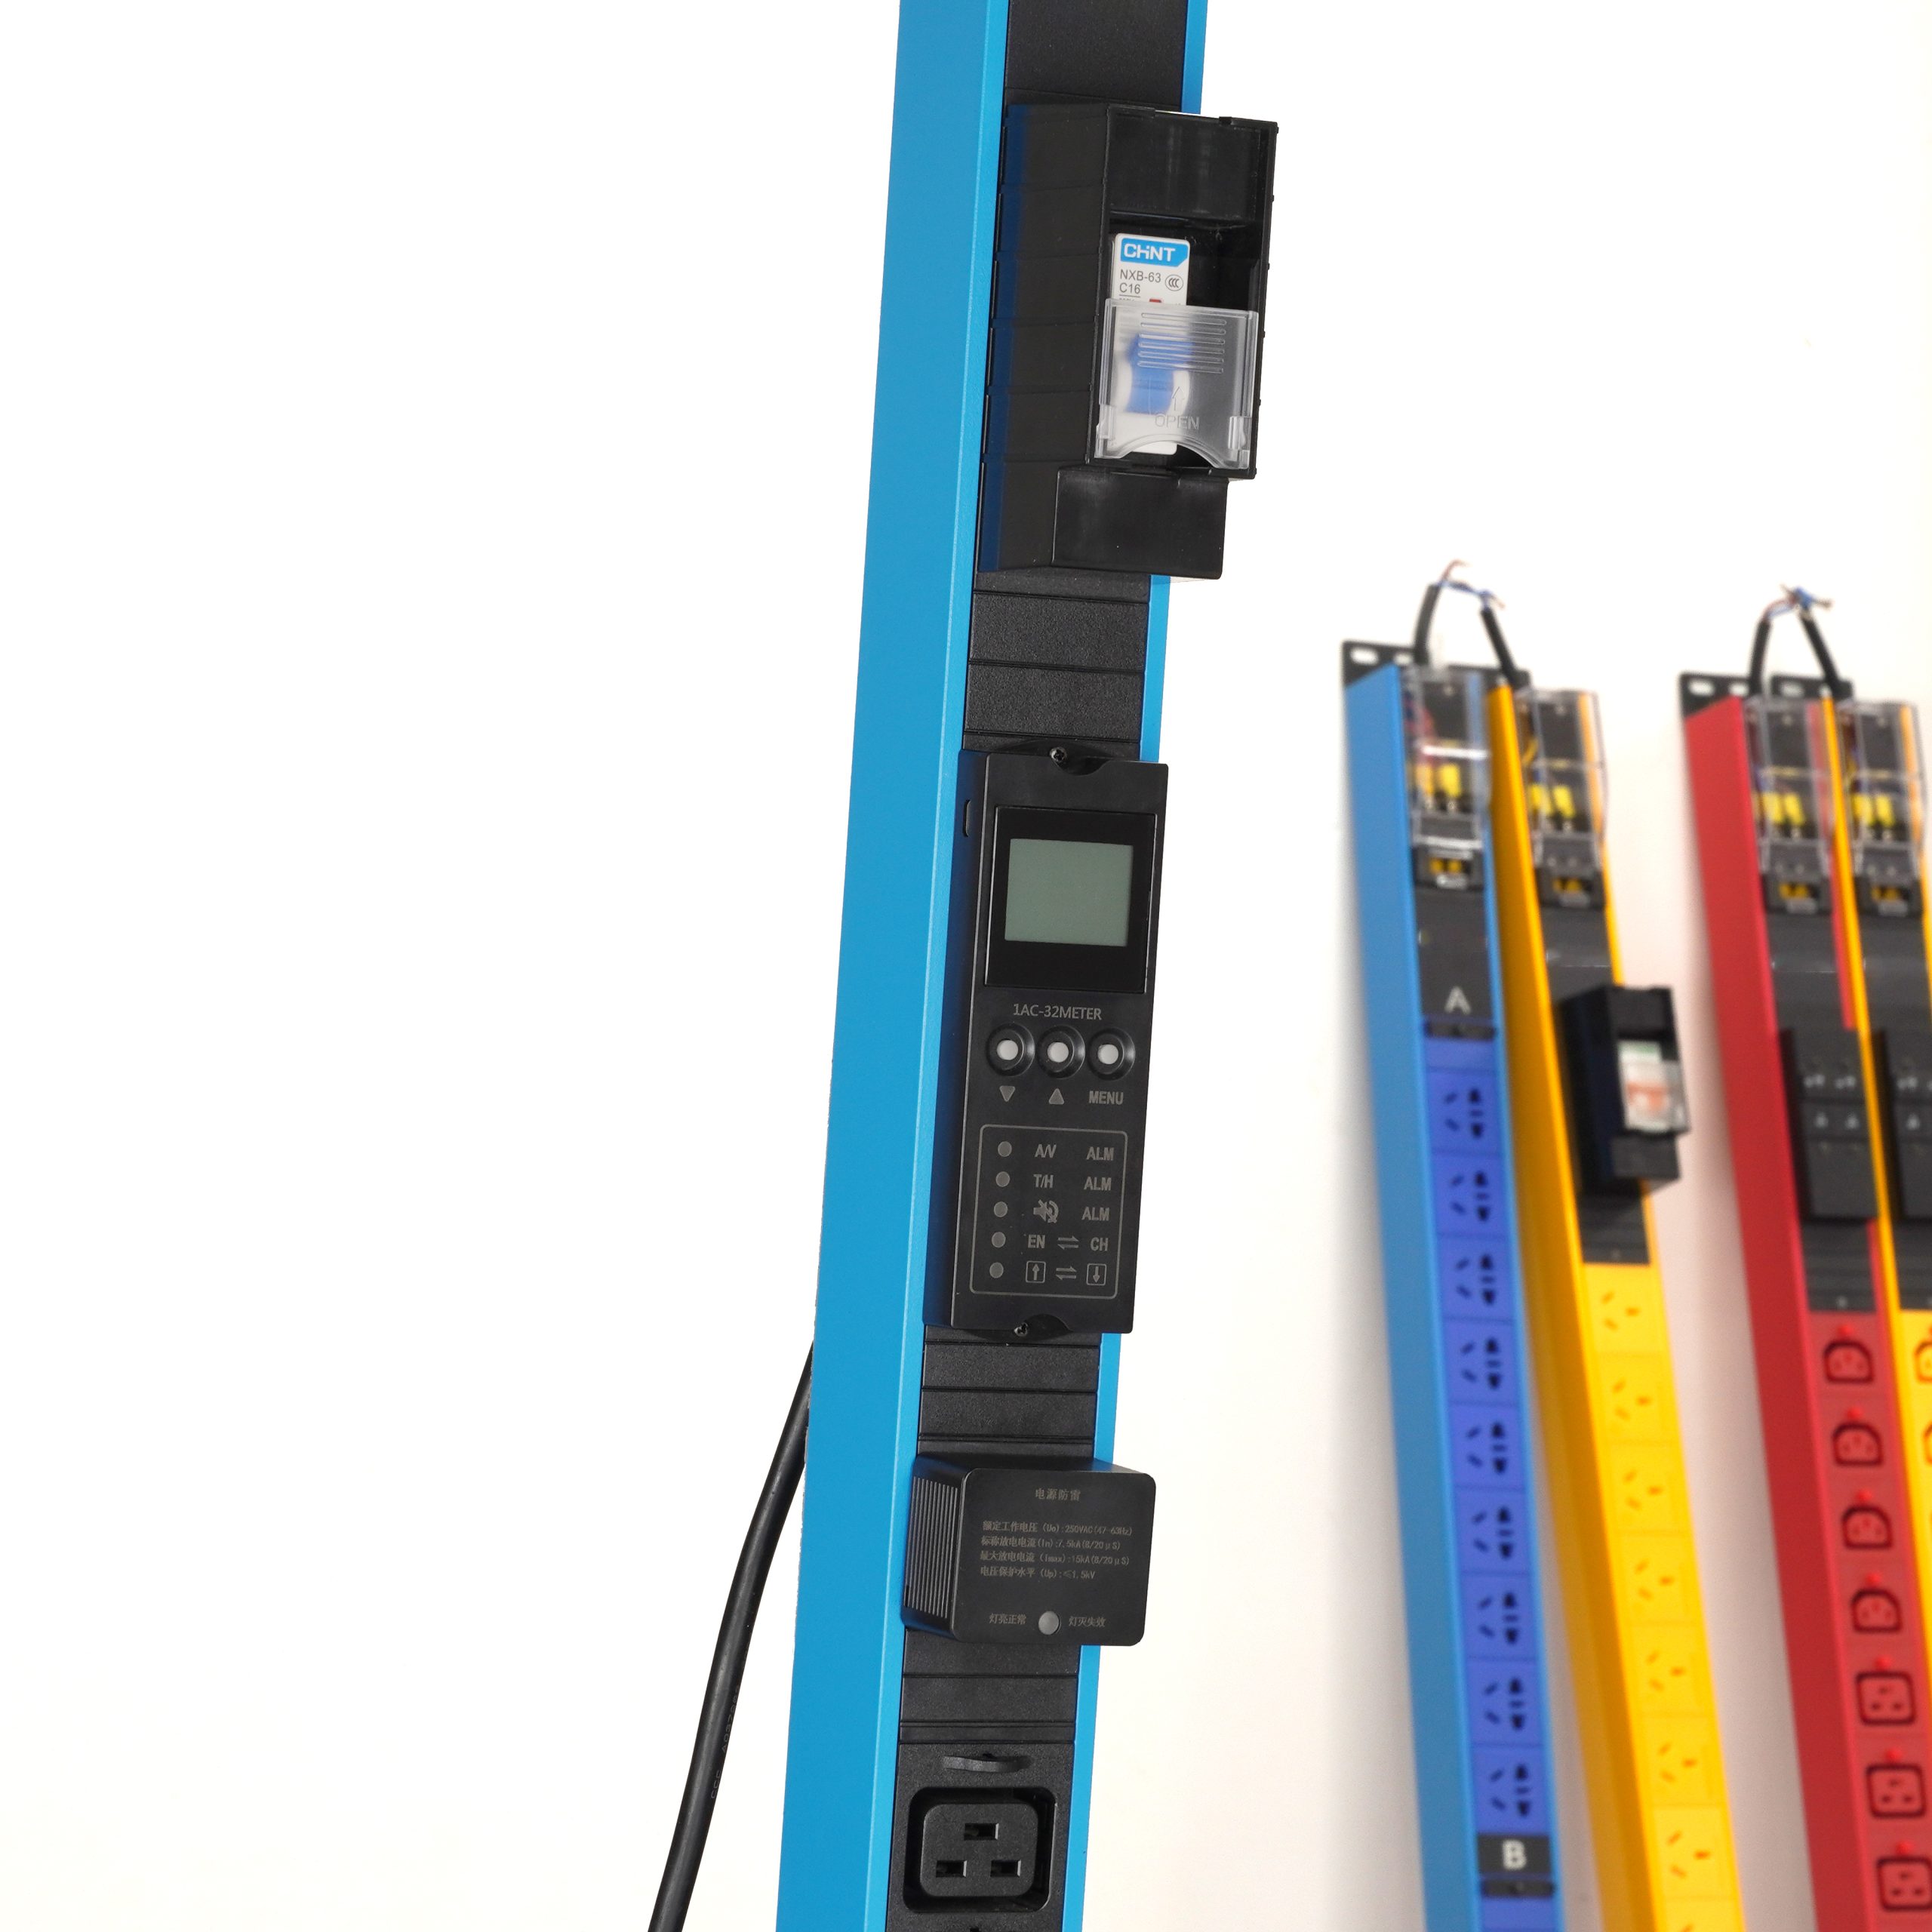 How to select different types of PDUs in the data center?